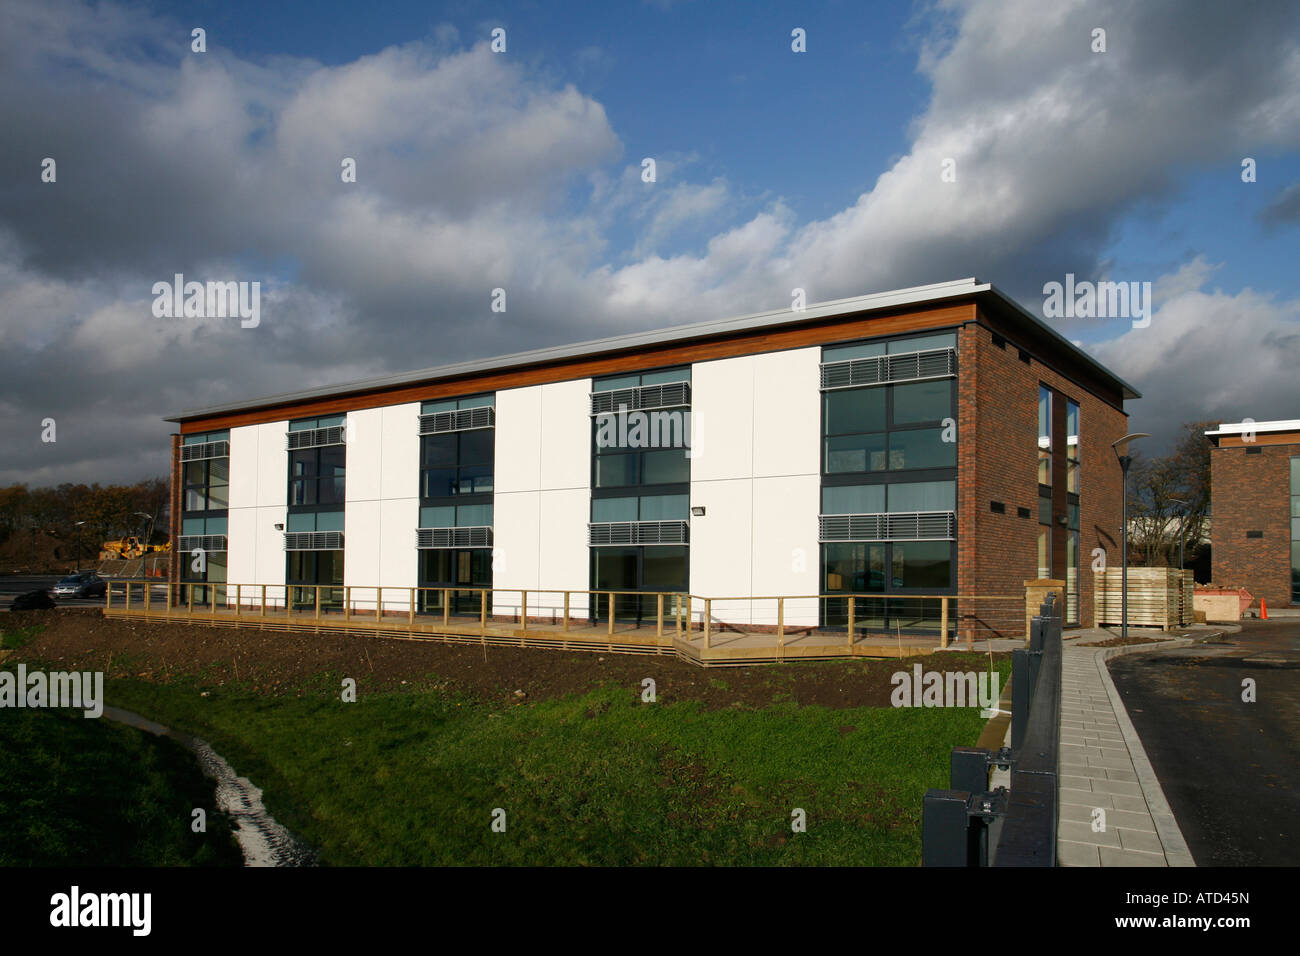 Exterior of a 2 storey office building in a modern Business Park Stock Photo